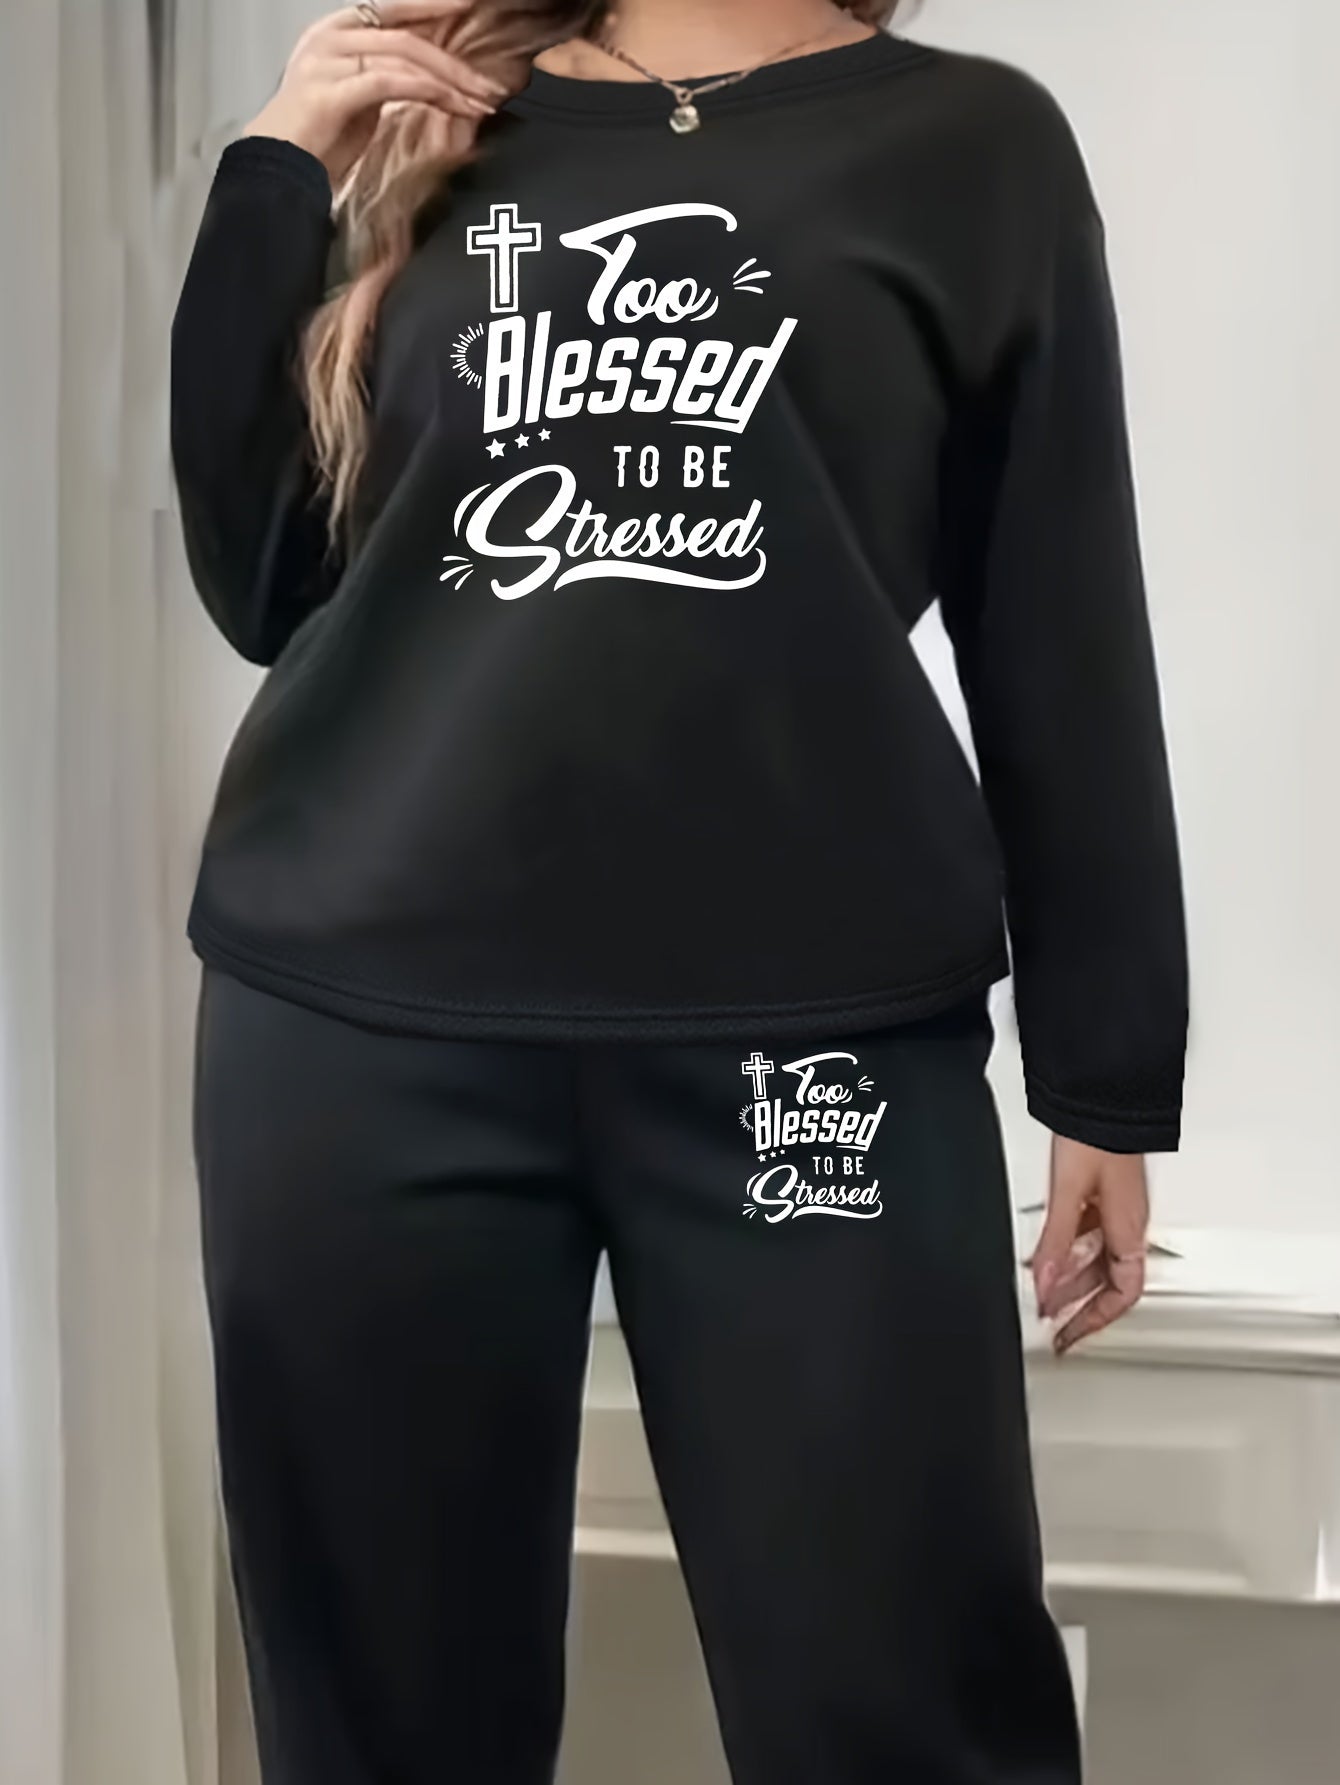 Too Blessed To Be Stressed Plus Size Women's Christian Pajamas claimedbygoddesigns